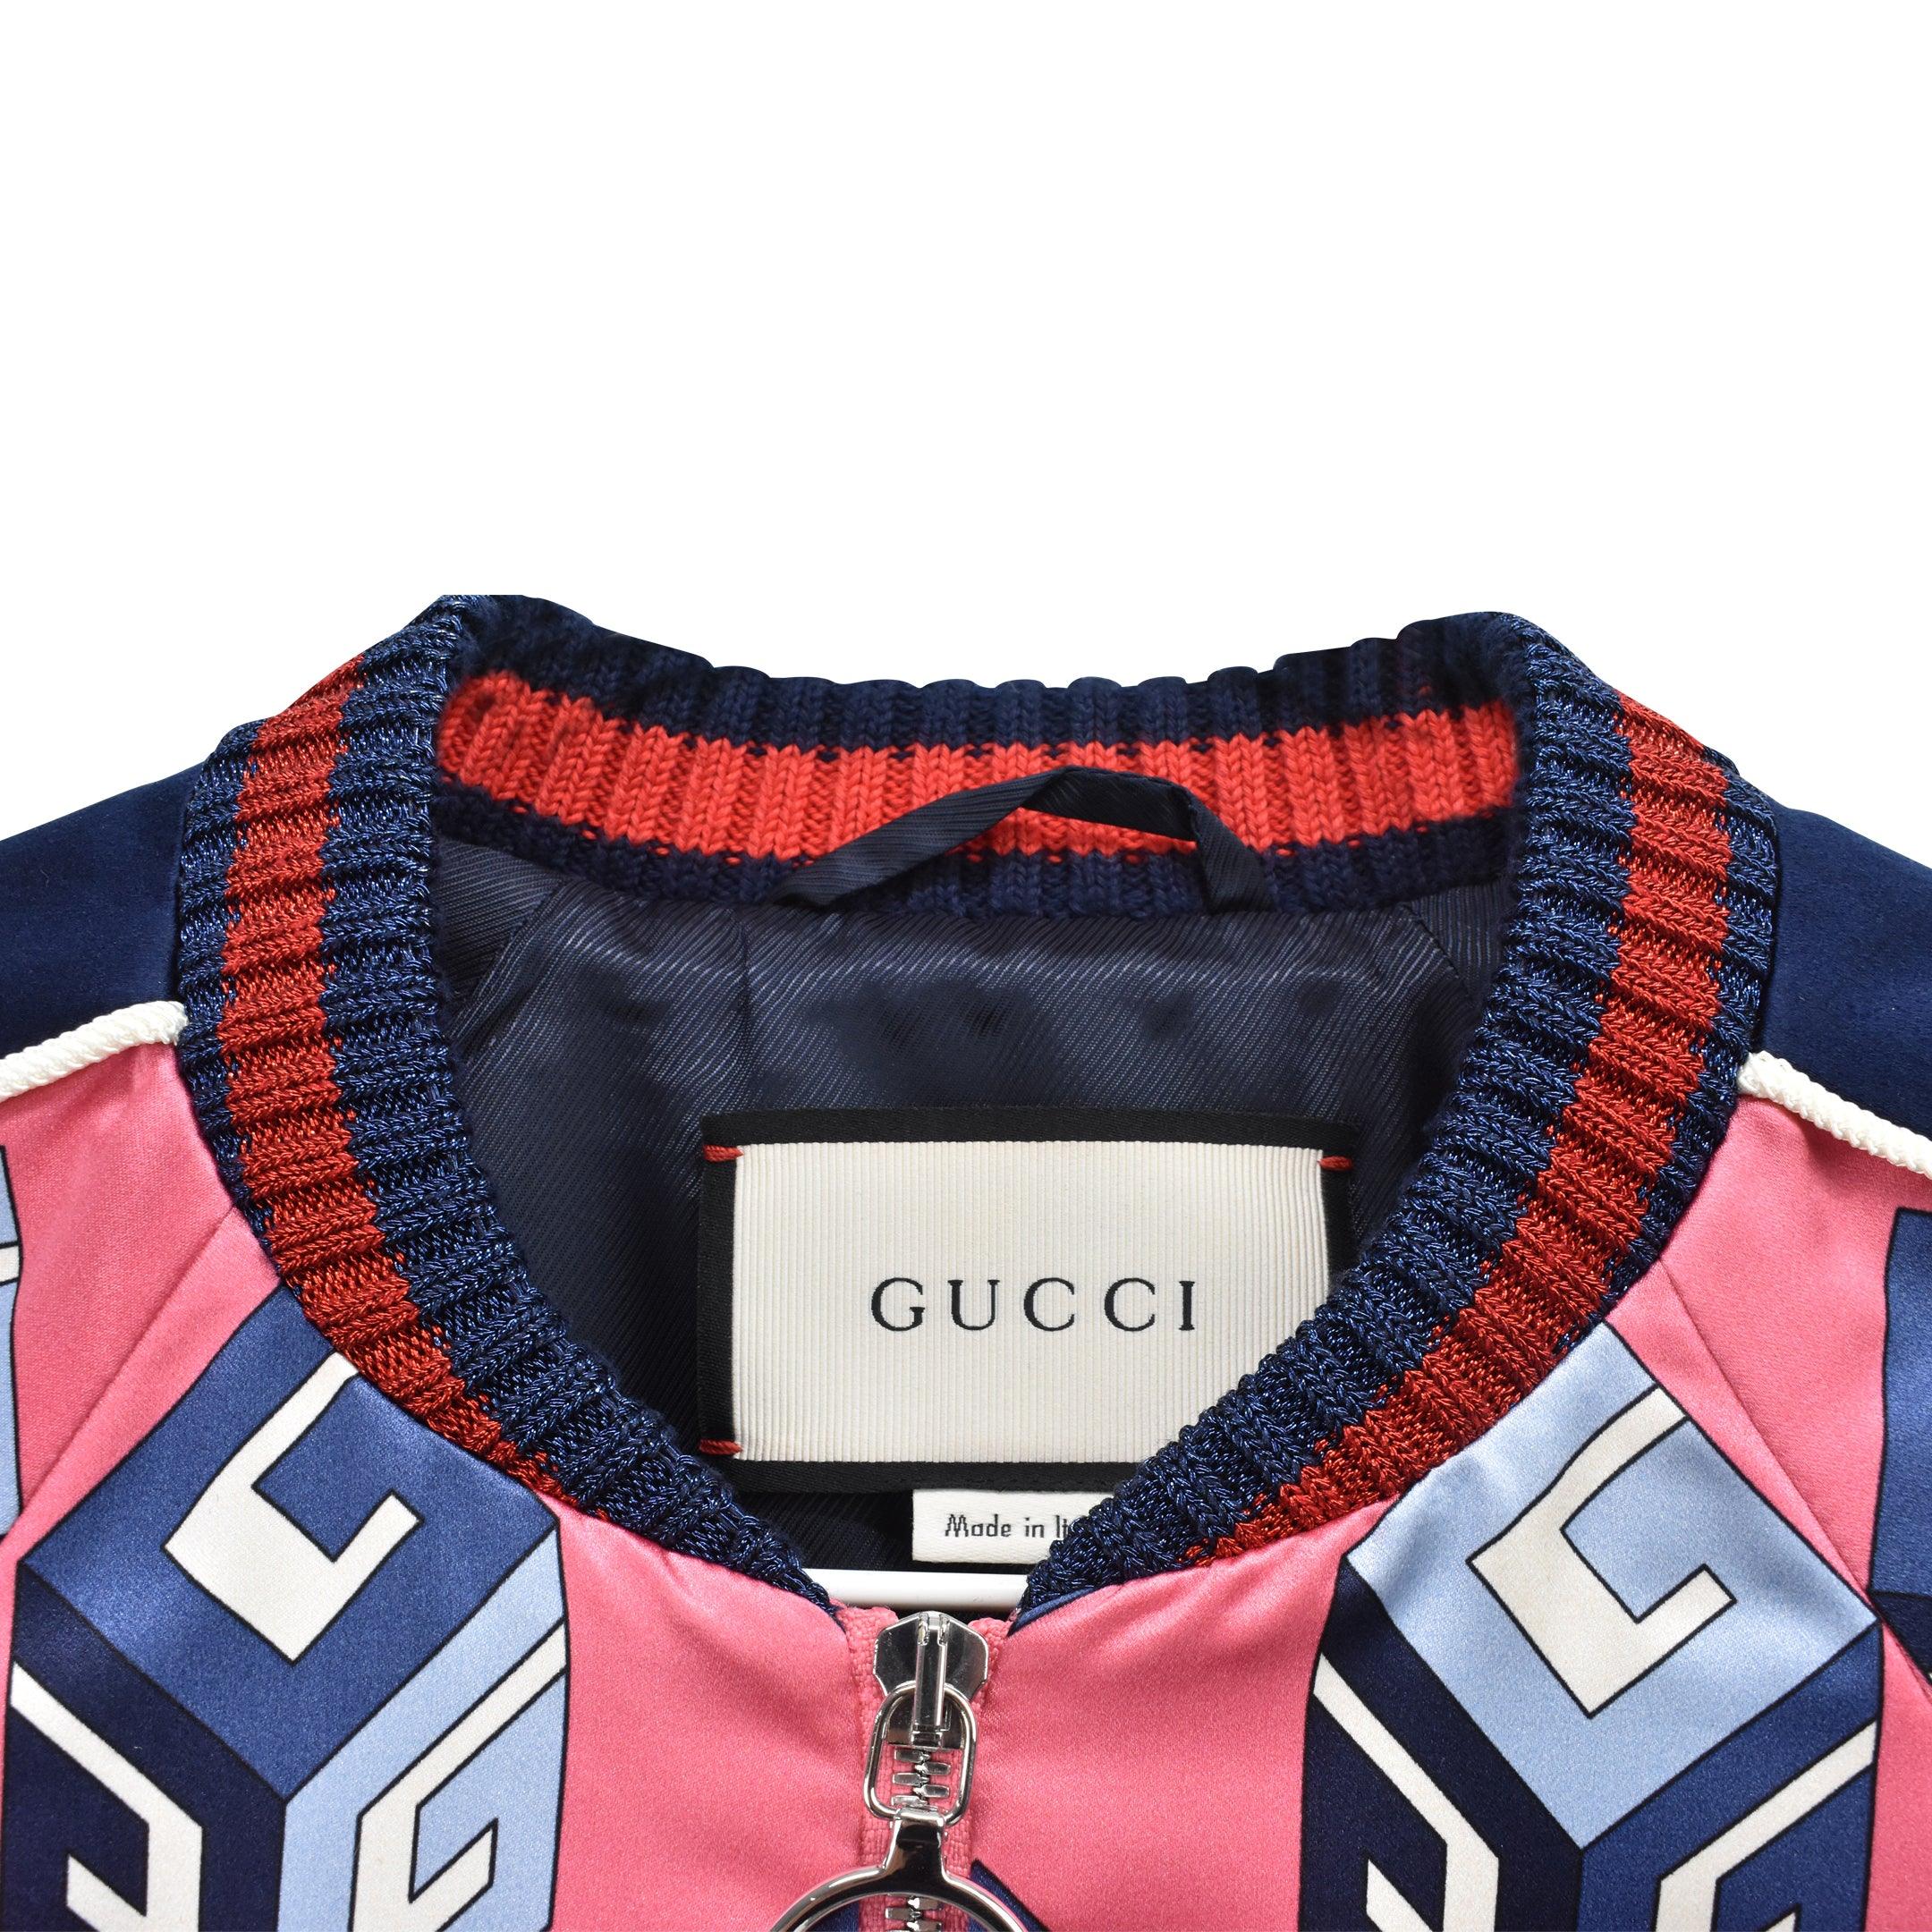 Gucci Jacket ( New) Rm600 Nego, Men's Fashion, Tops & Sets, Hoodies on  Carousell